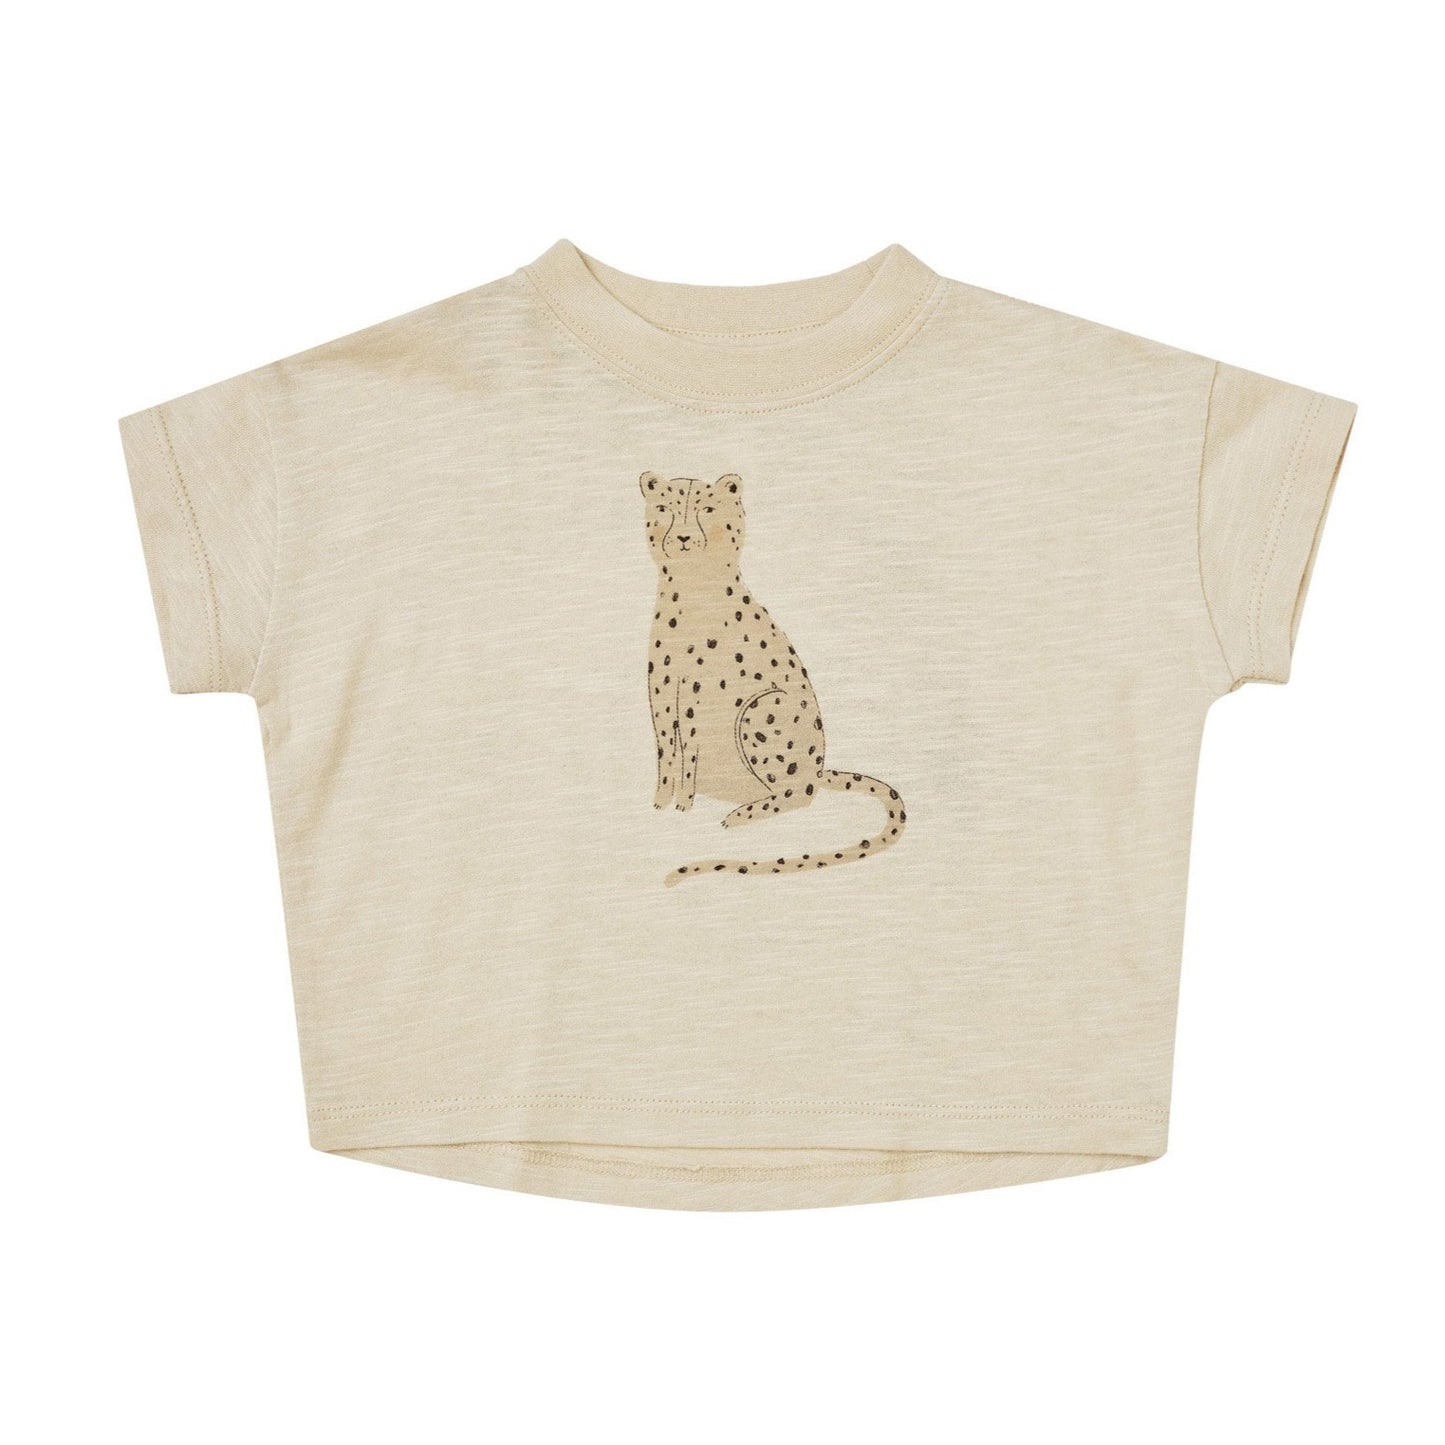 Rylee and Cru Boxy Tee - Leopard - Natural